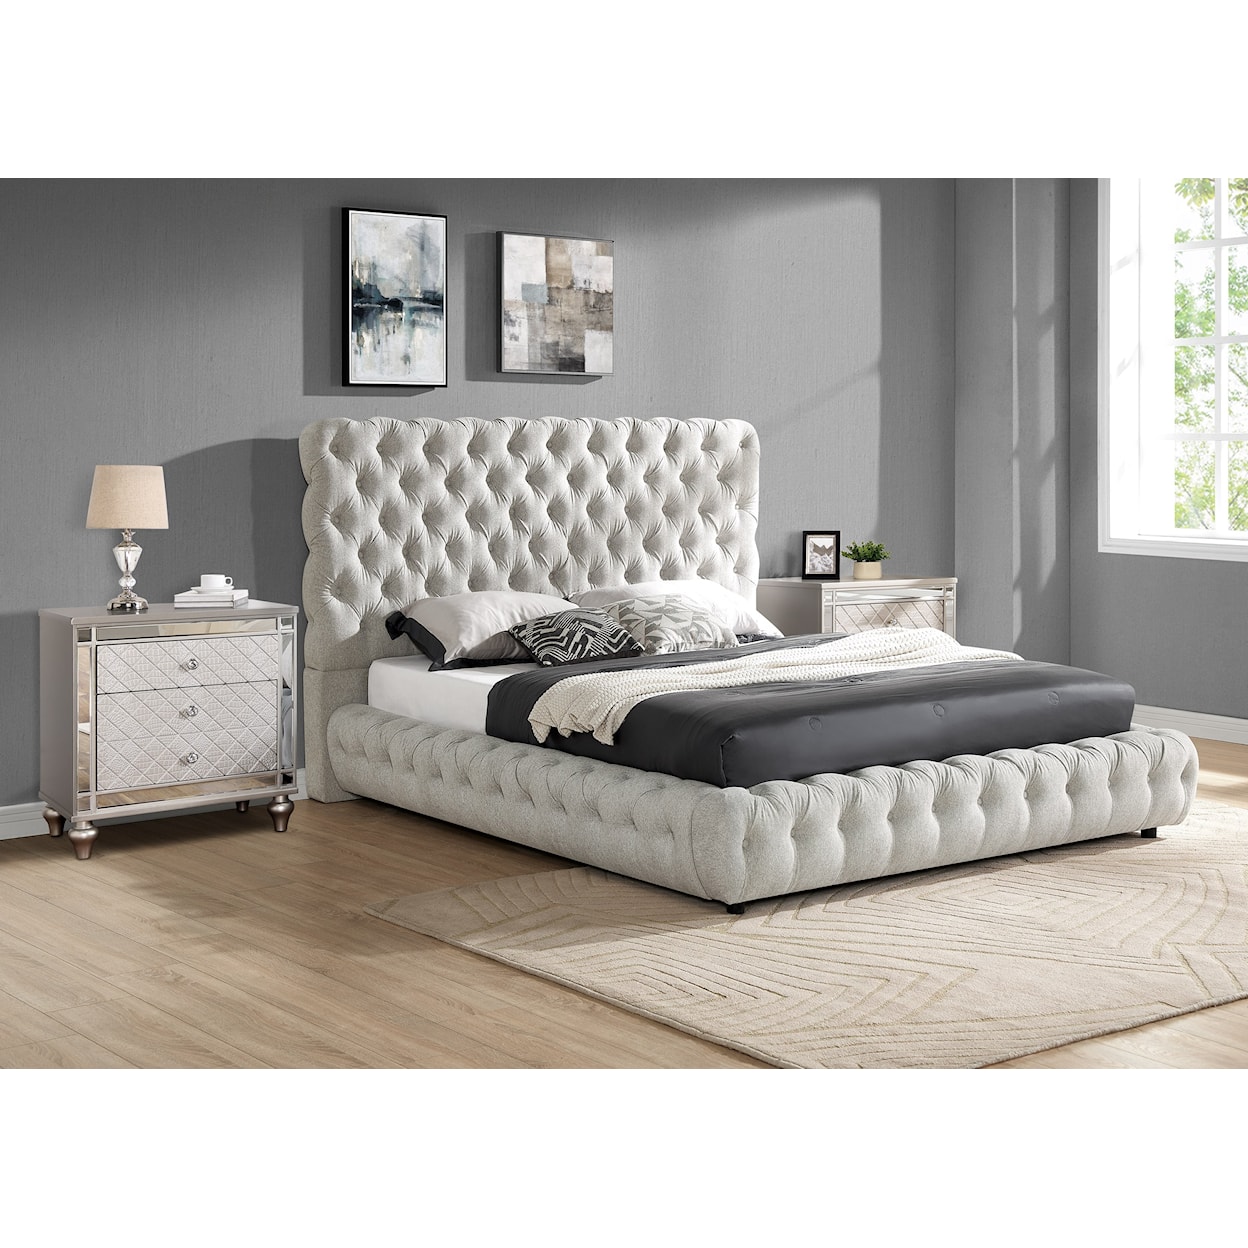 CM Flory Upholstered Bed - Queen